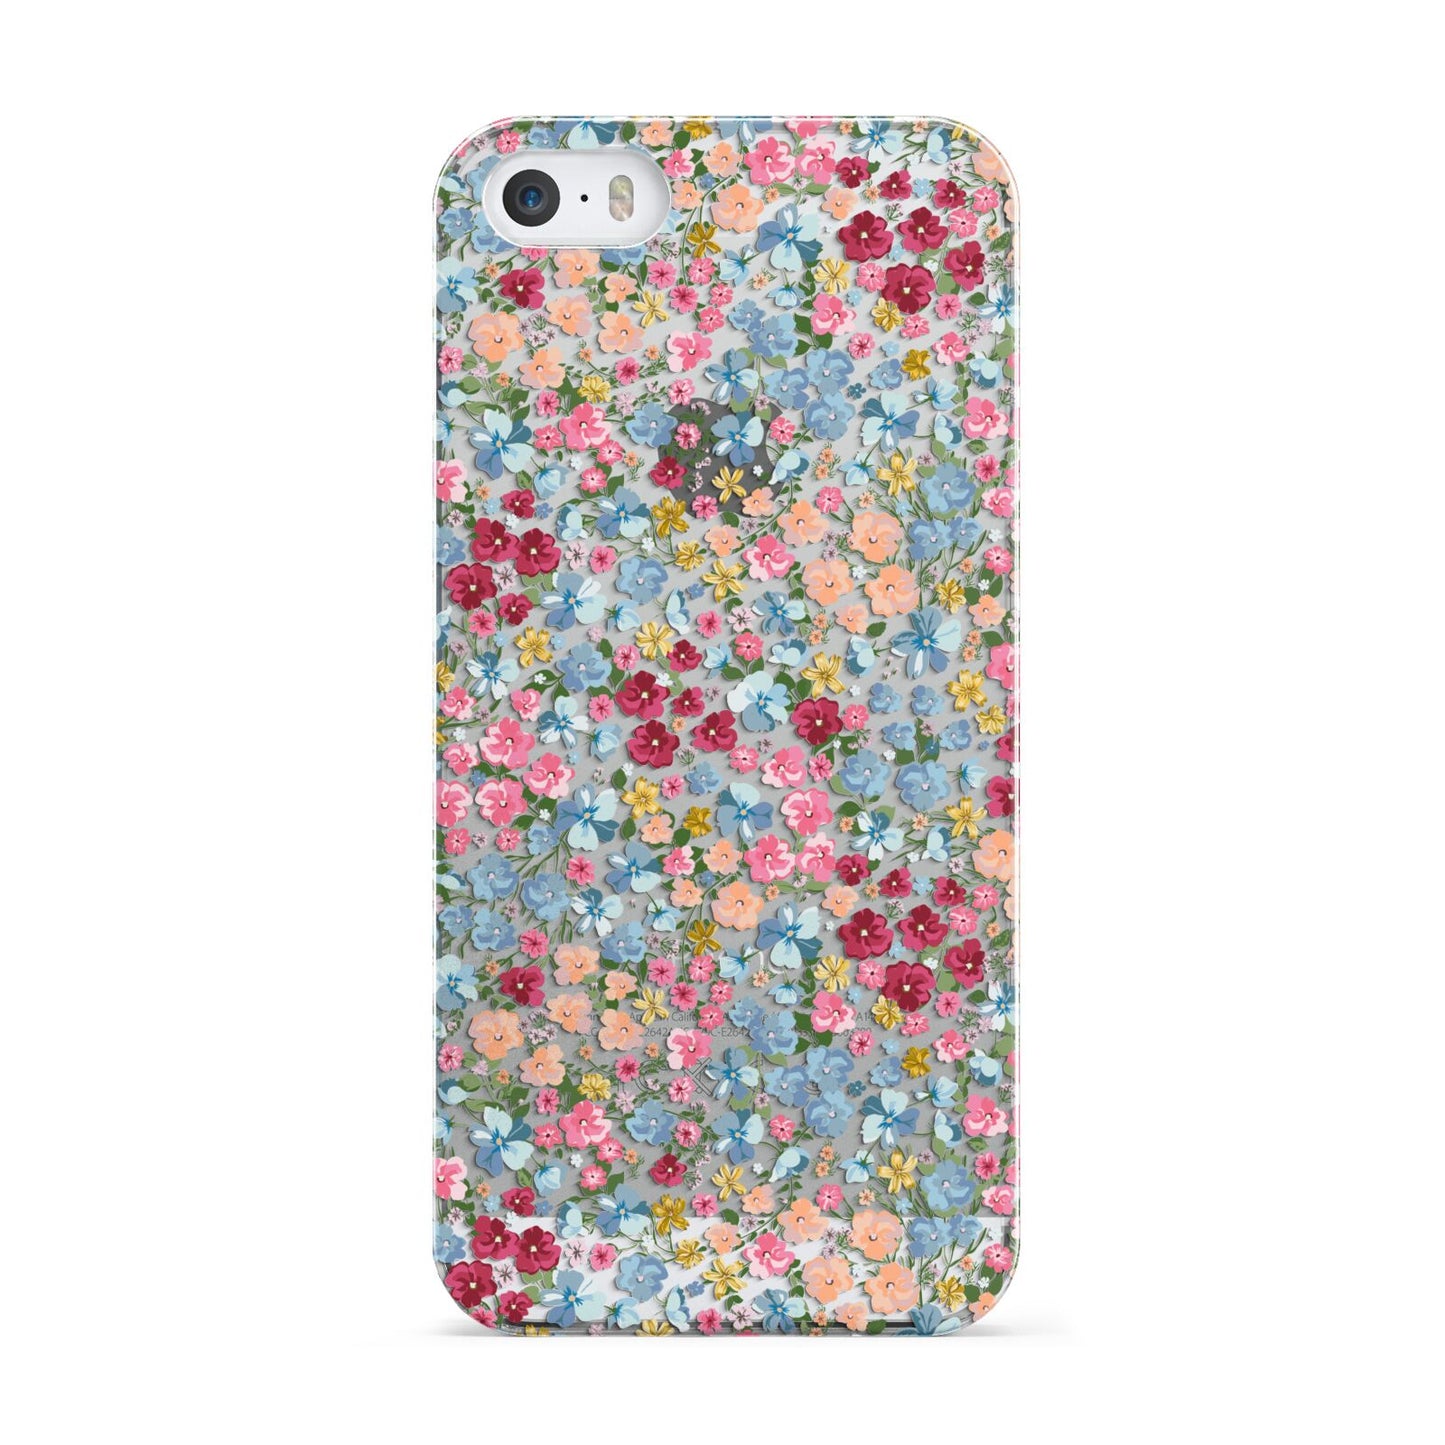 Floral Meadow Apple iPhone 5 Case